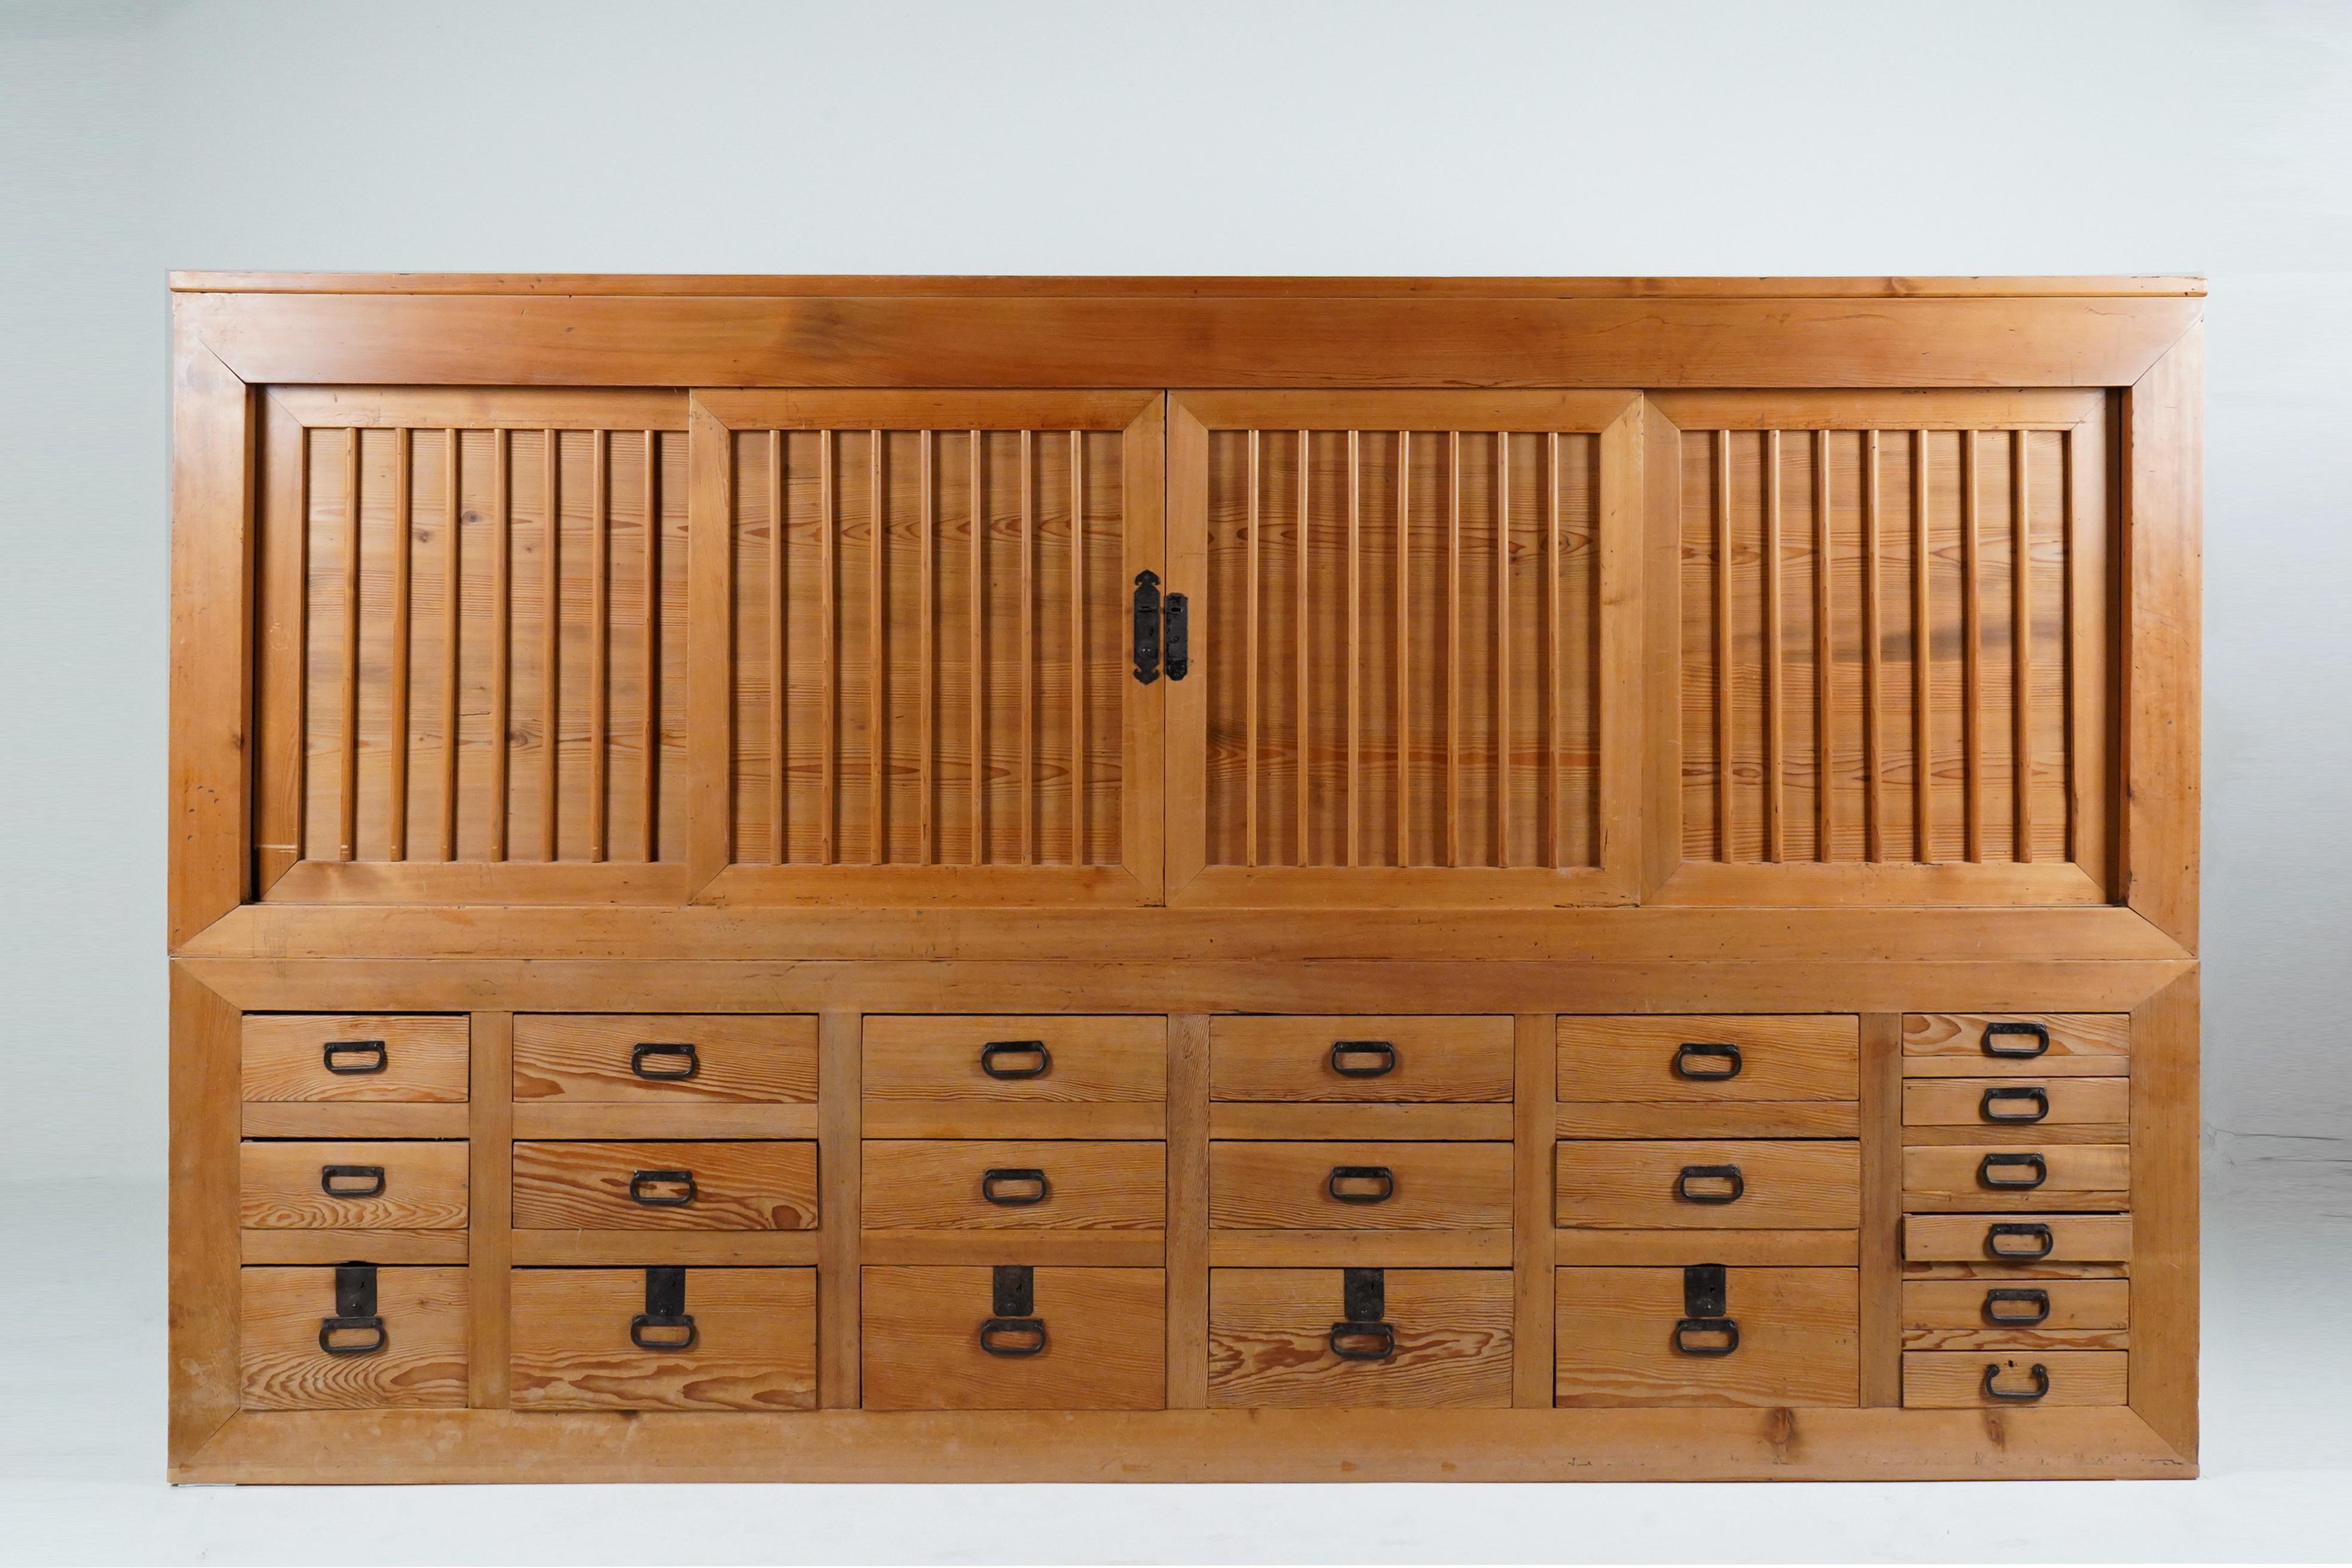 A large 2-piece Japanese Mizuya kitchen tansu with 21 drawers and an upper cabinet with 4 sliding doors. Behind the sliding doors is a large open space bisected by a half-depth shelf. The exterior has been totally stripped of its original lacquer